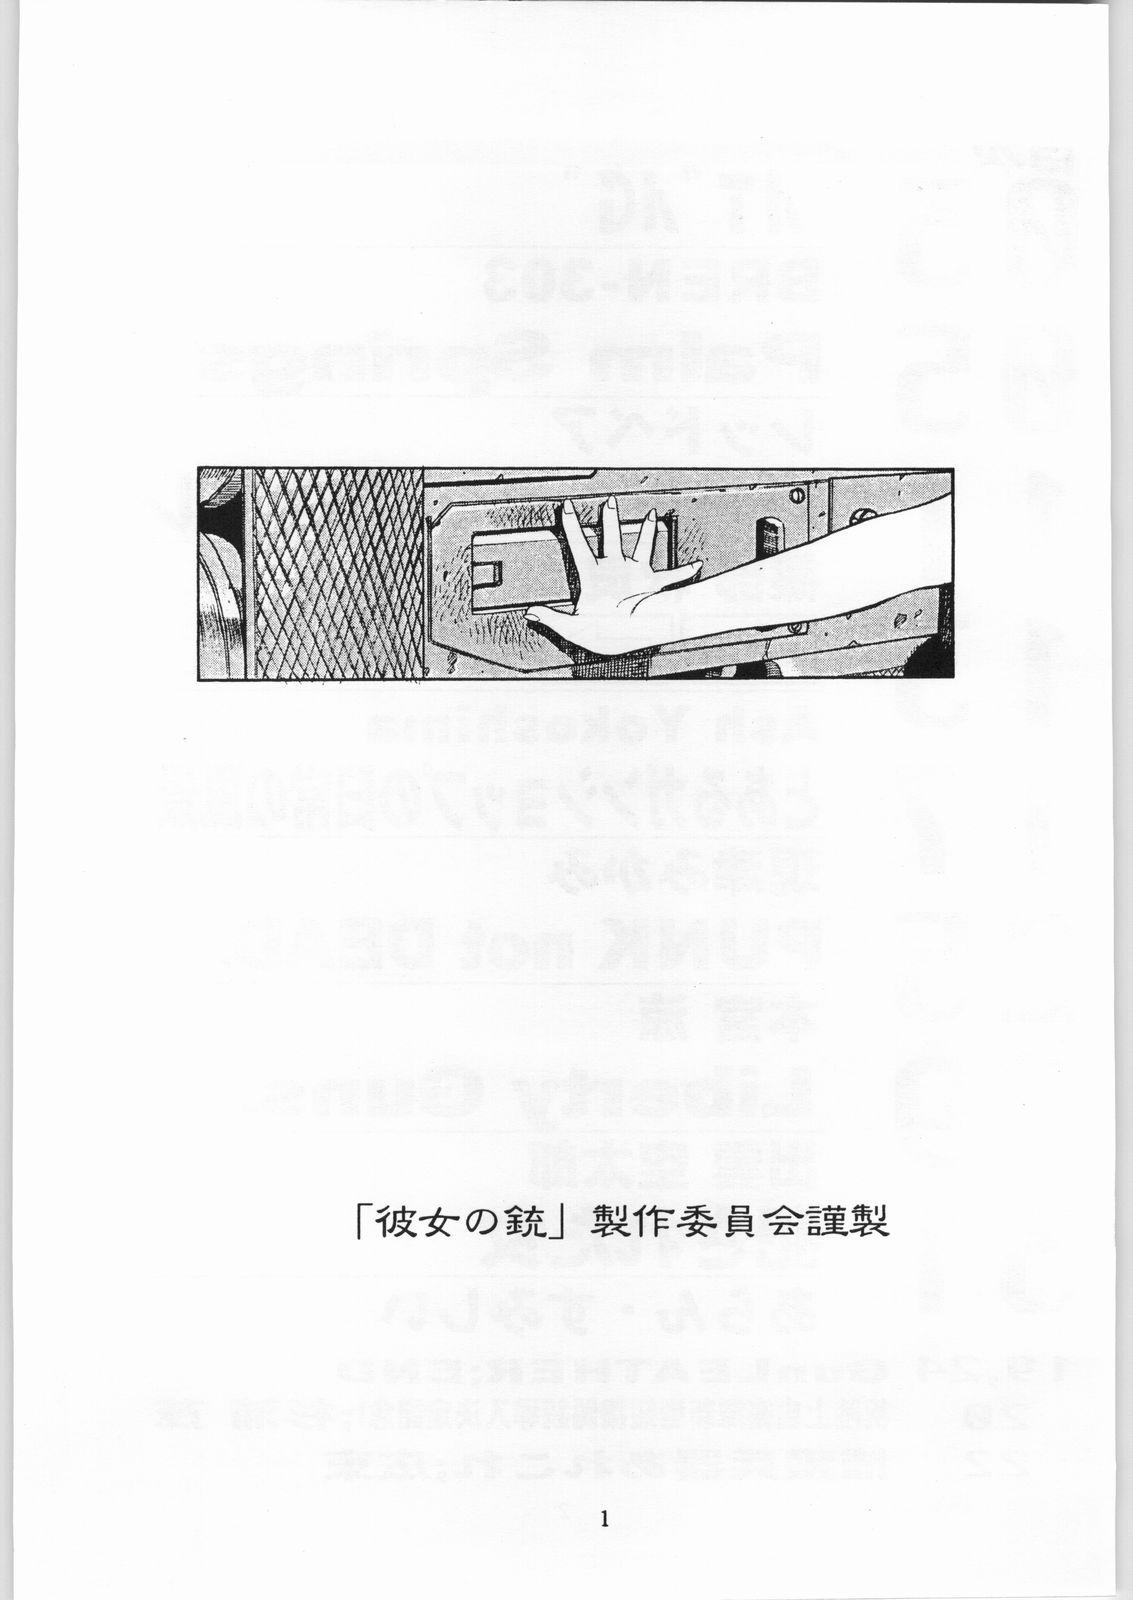 Doctor Sex Kanojo No Juu - Final fantasy vii Ghost in the shell Rubia - Page 2